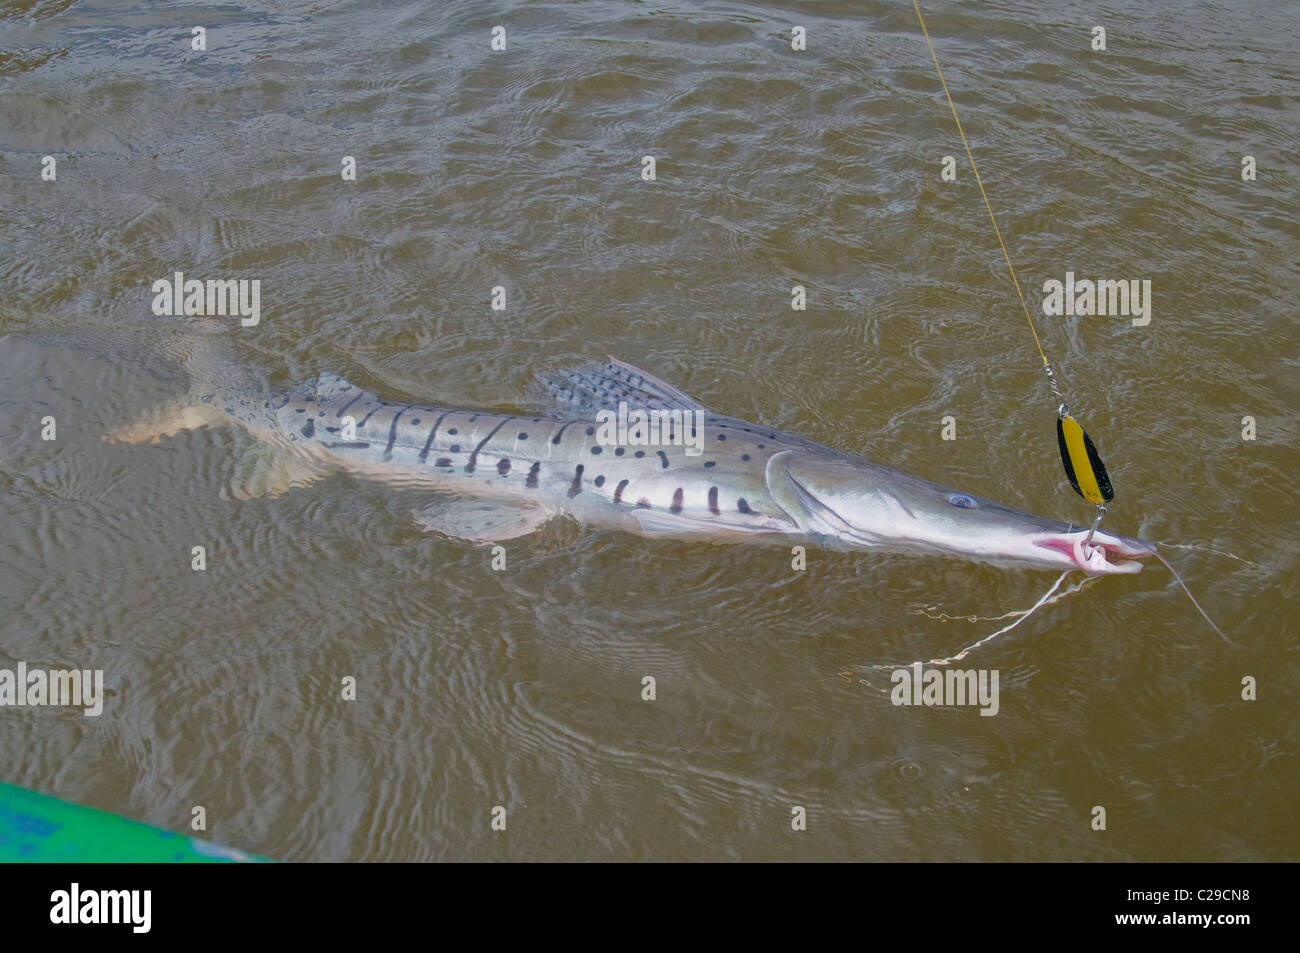 A big striped catfish caught on a spoon in a deep lagoon off the Rio Bita in Colombia's Amazon Basin. Stock Photo